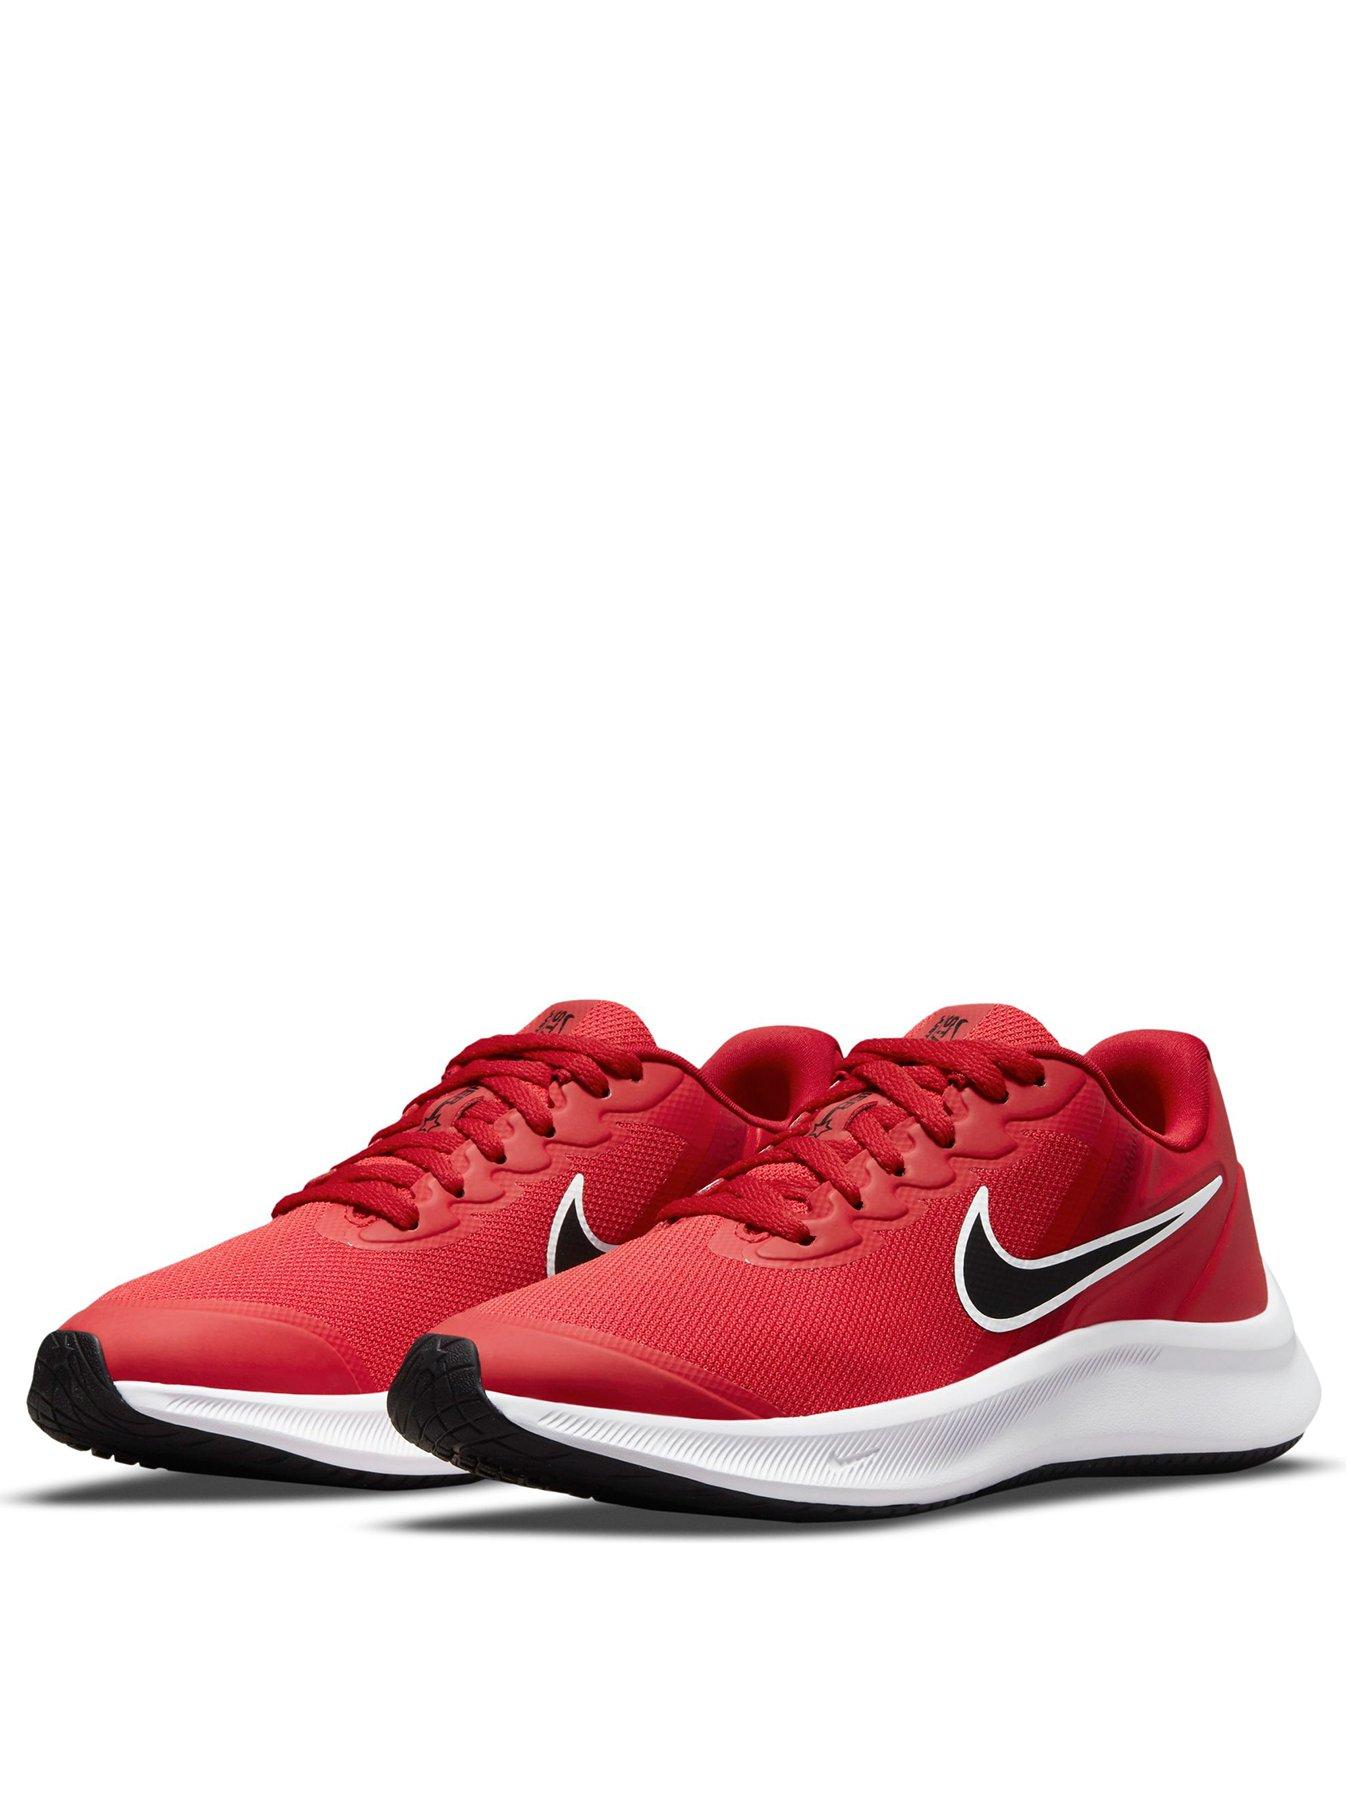 nike red trainers uk